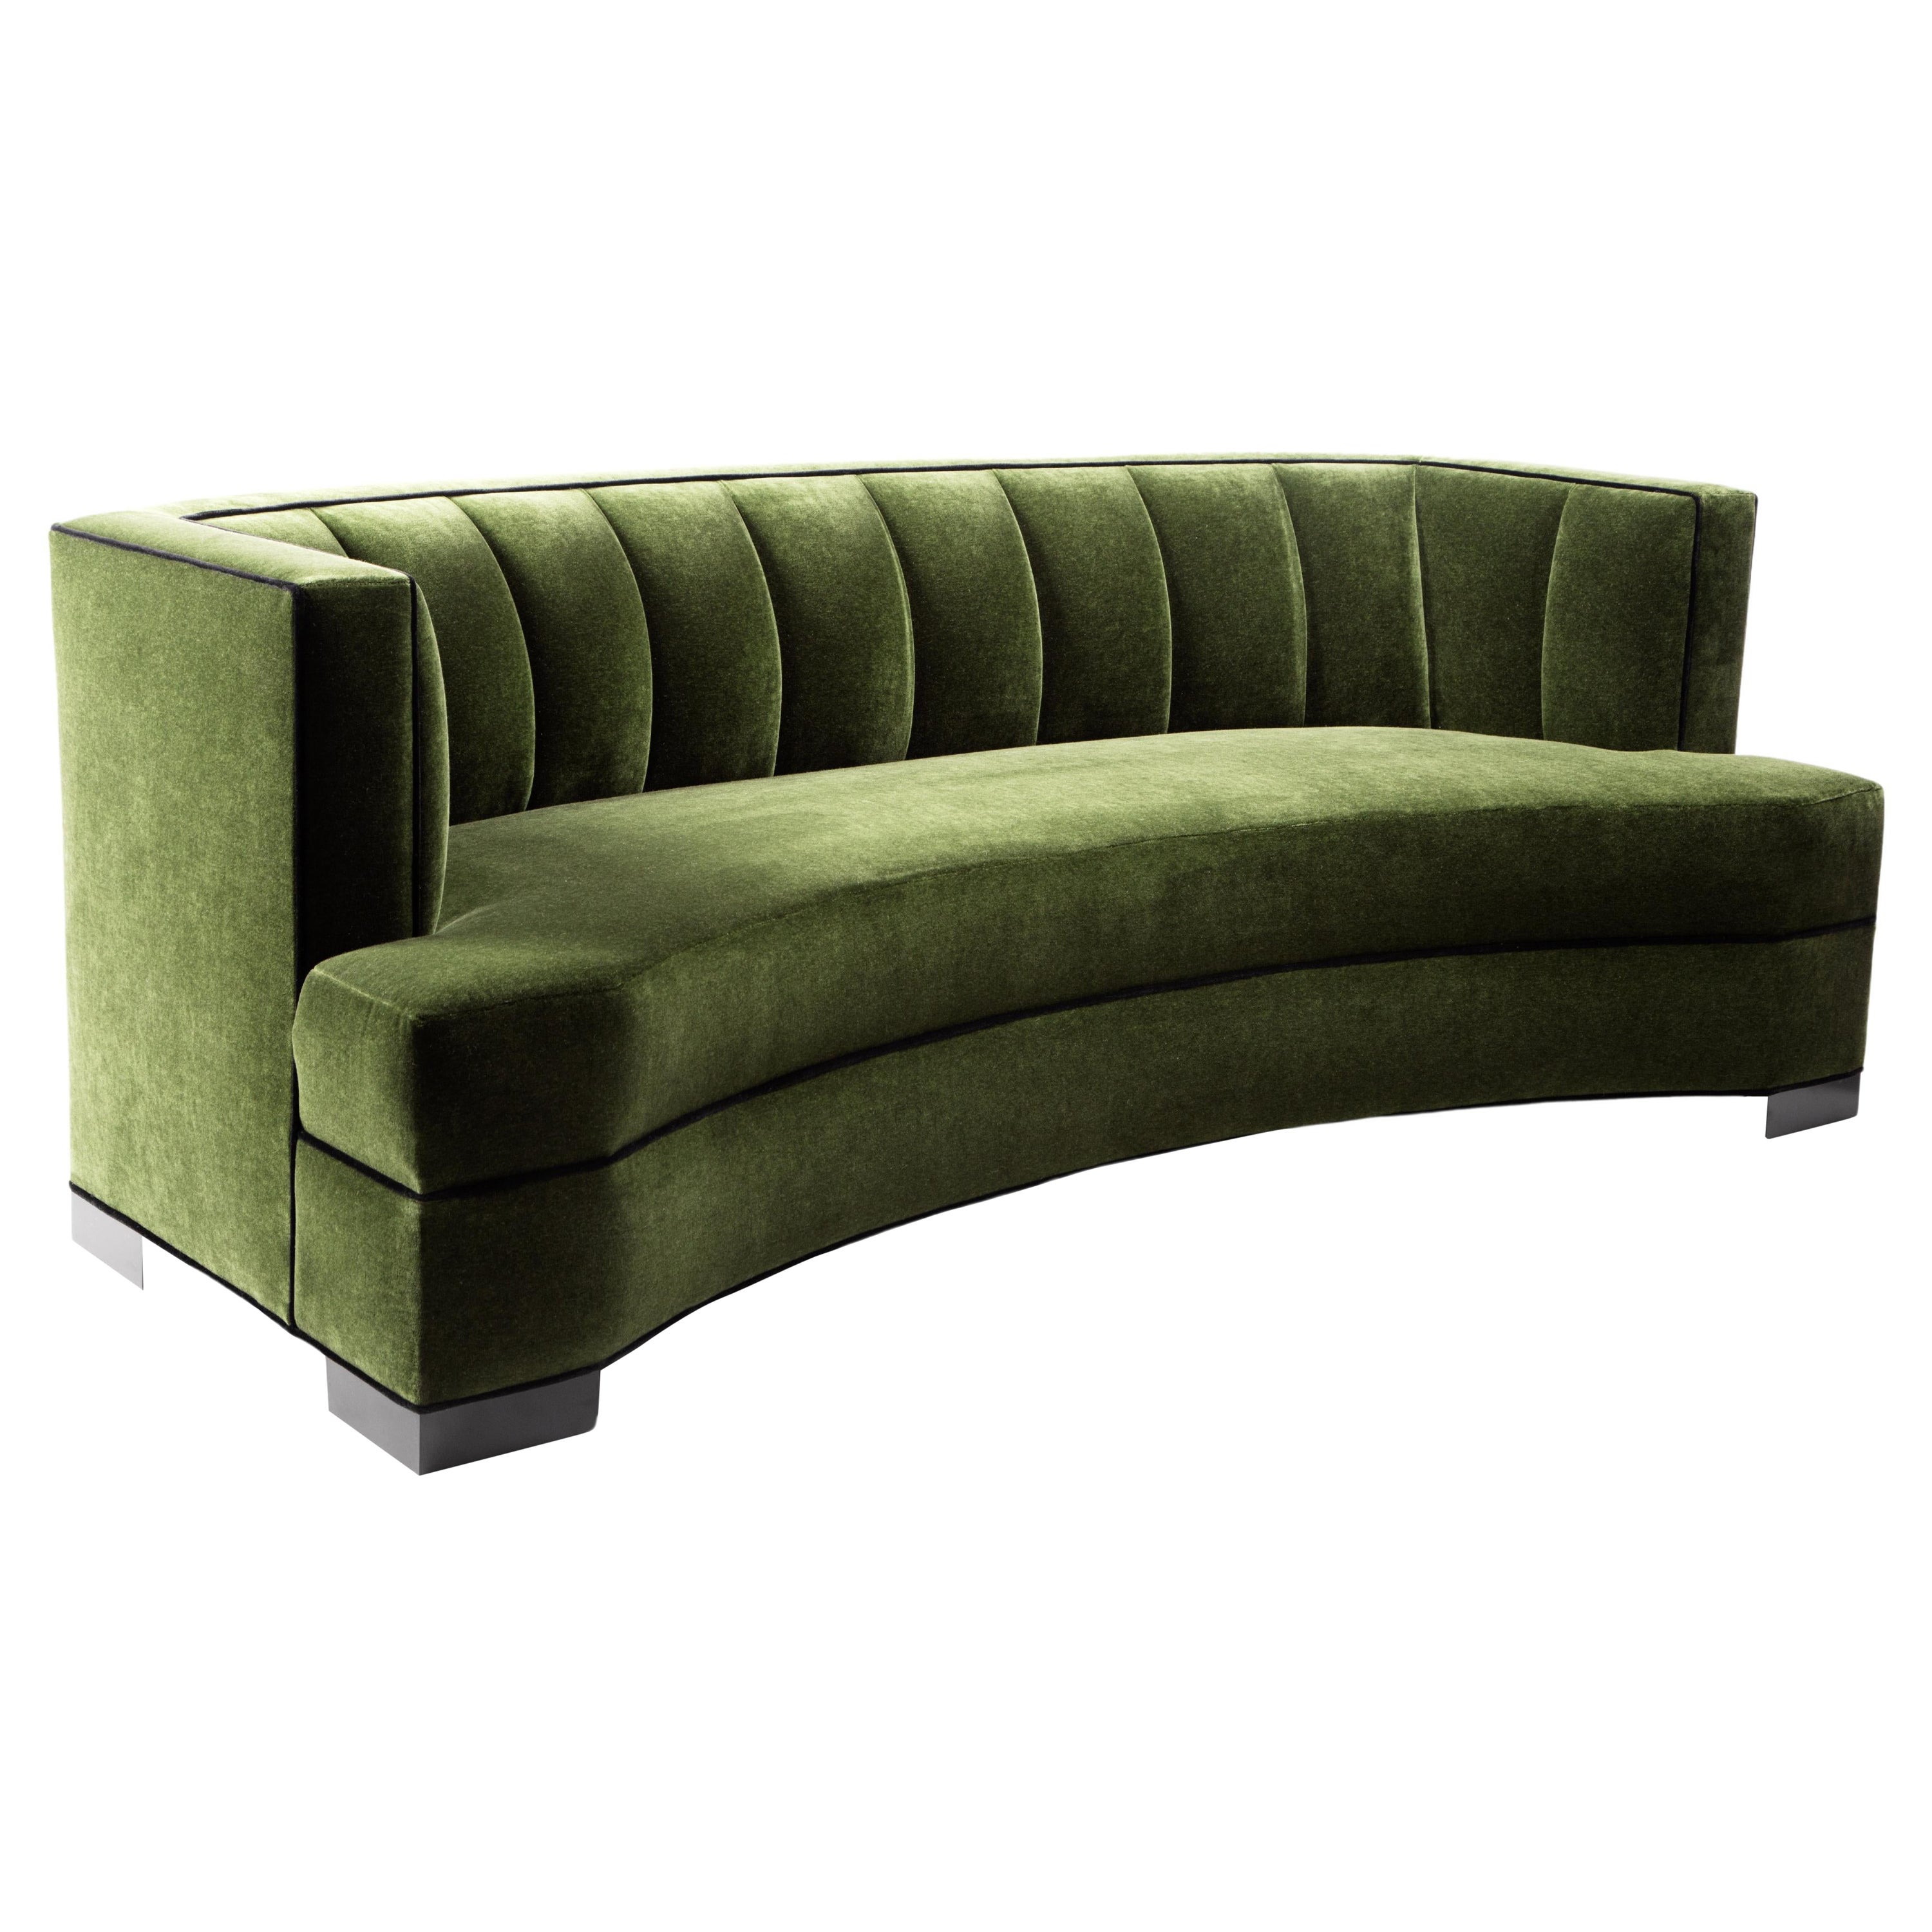 Art Deco Alessandra Curved Sofa Handcrafted by JAMES by Jimmy Delaurentis